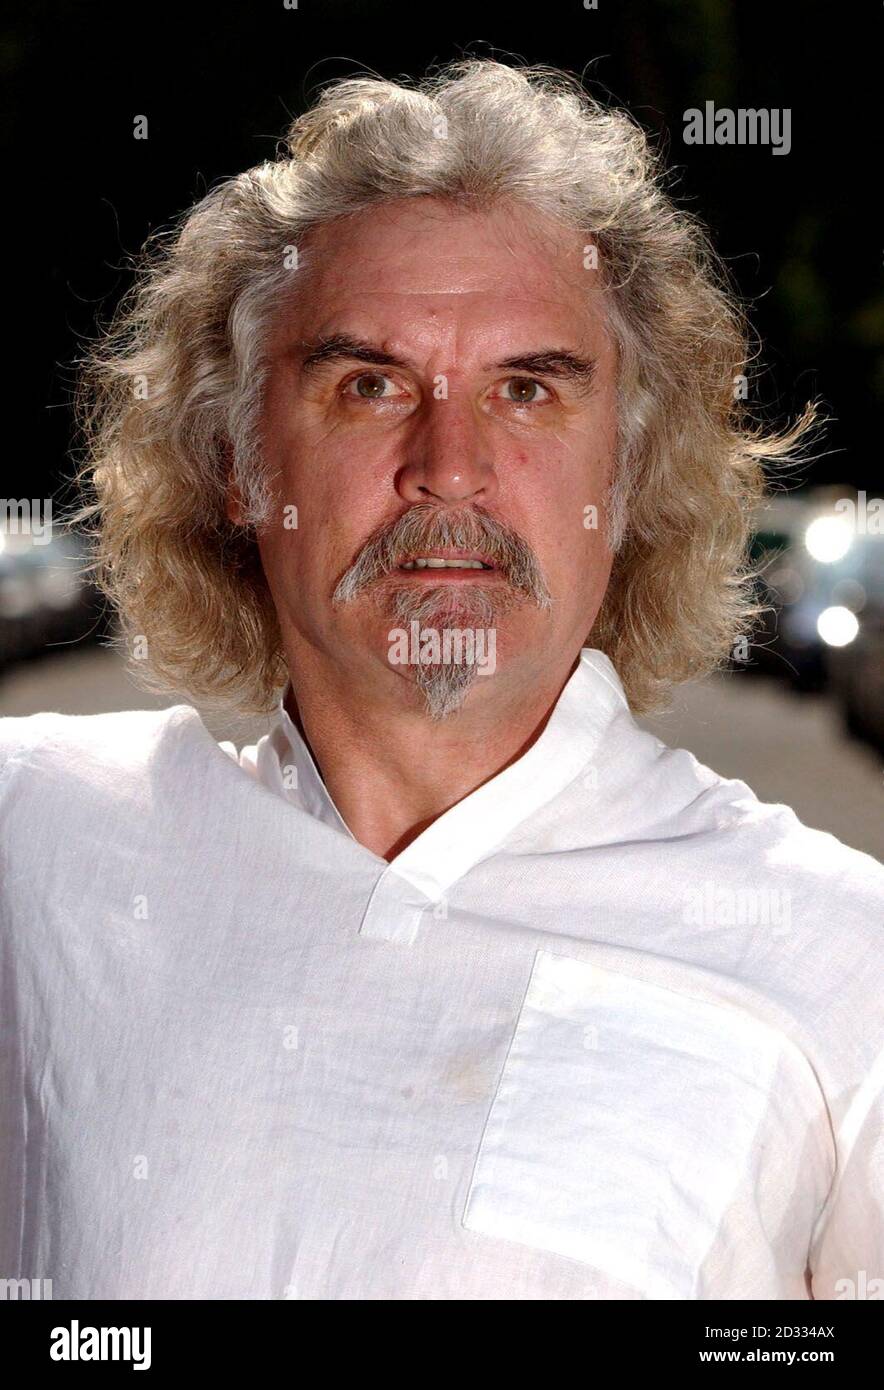 Actor and comedian Billy Connolly poses for photographers prior to a press conference for his new film 'The Man who Sued God' at St Mary's Church in Central London. The film premieres at the Warner West End Cinema in London's Leicester Square.  Stock Photo